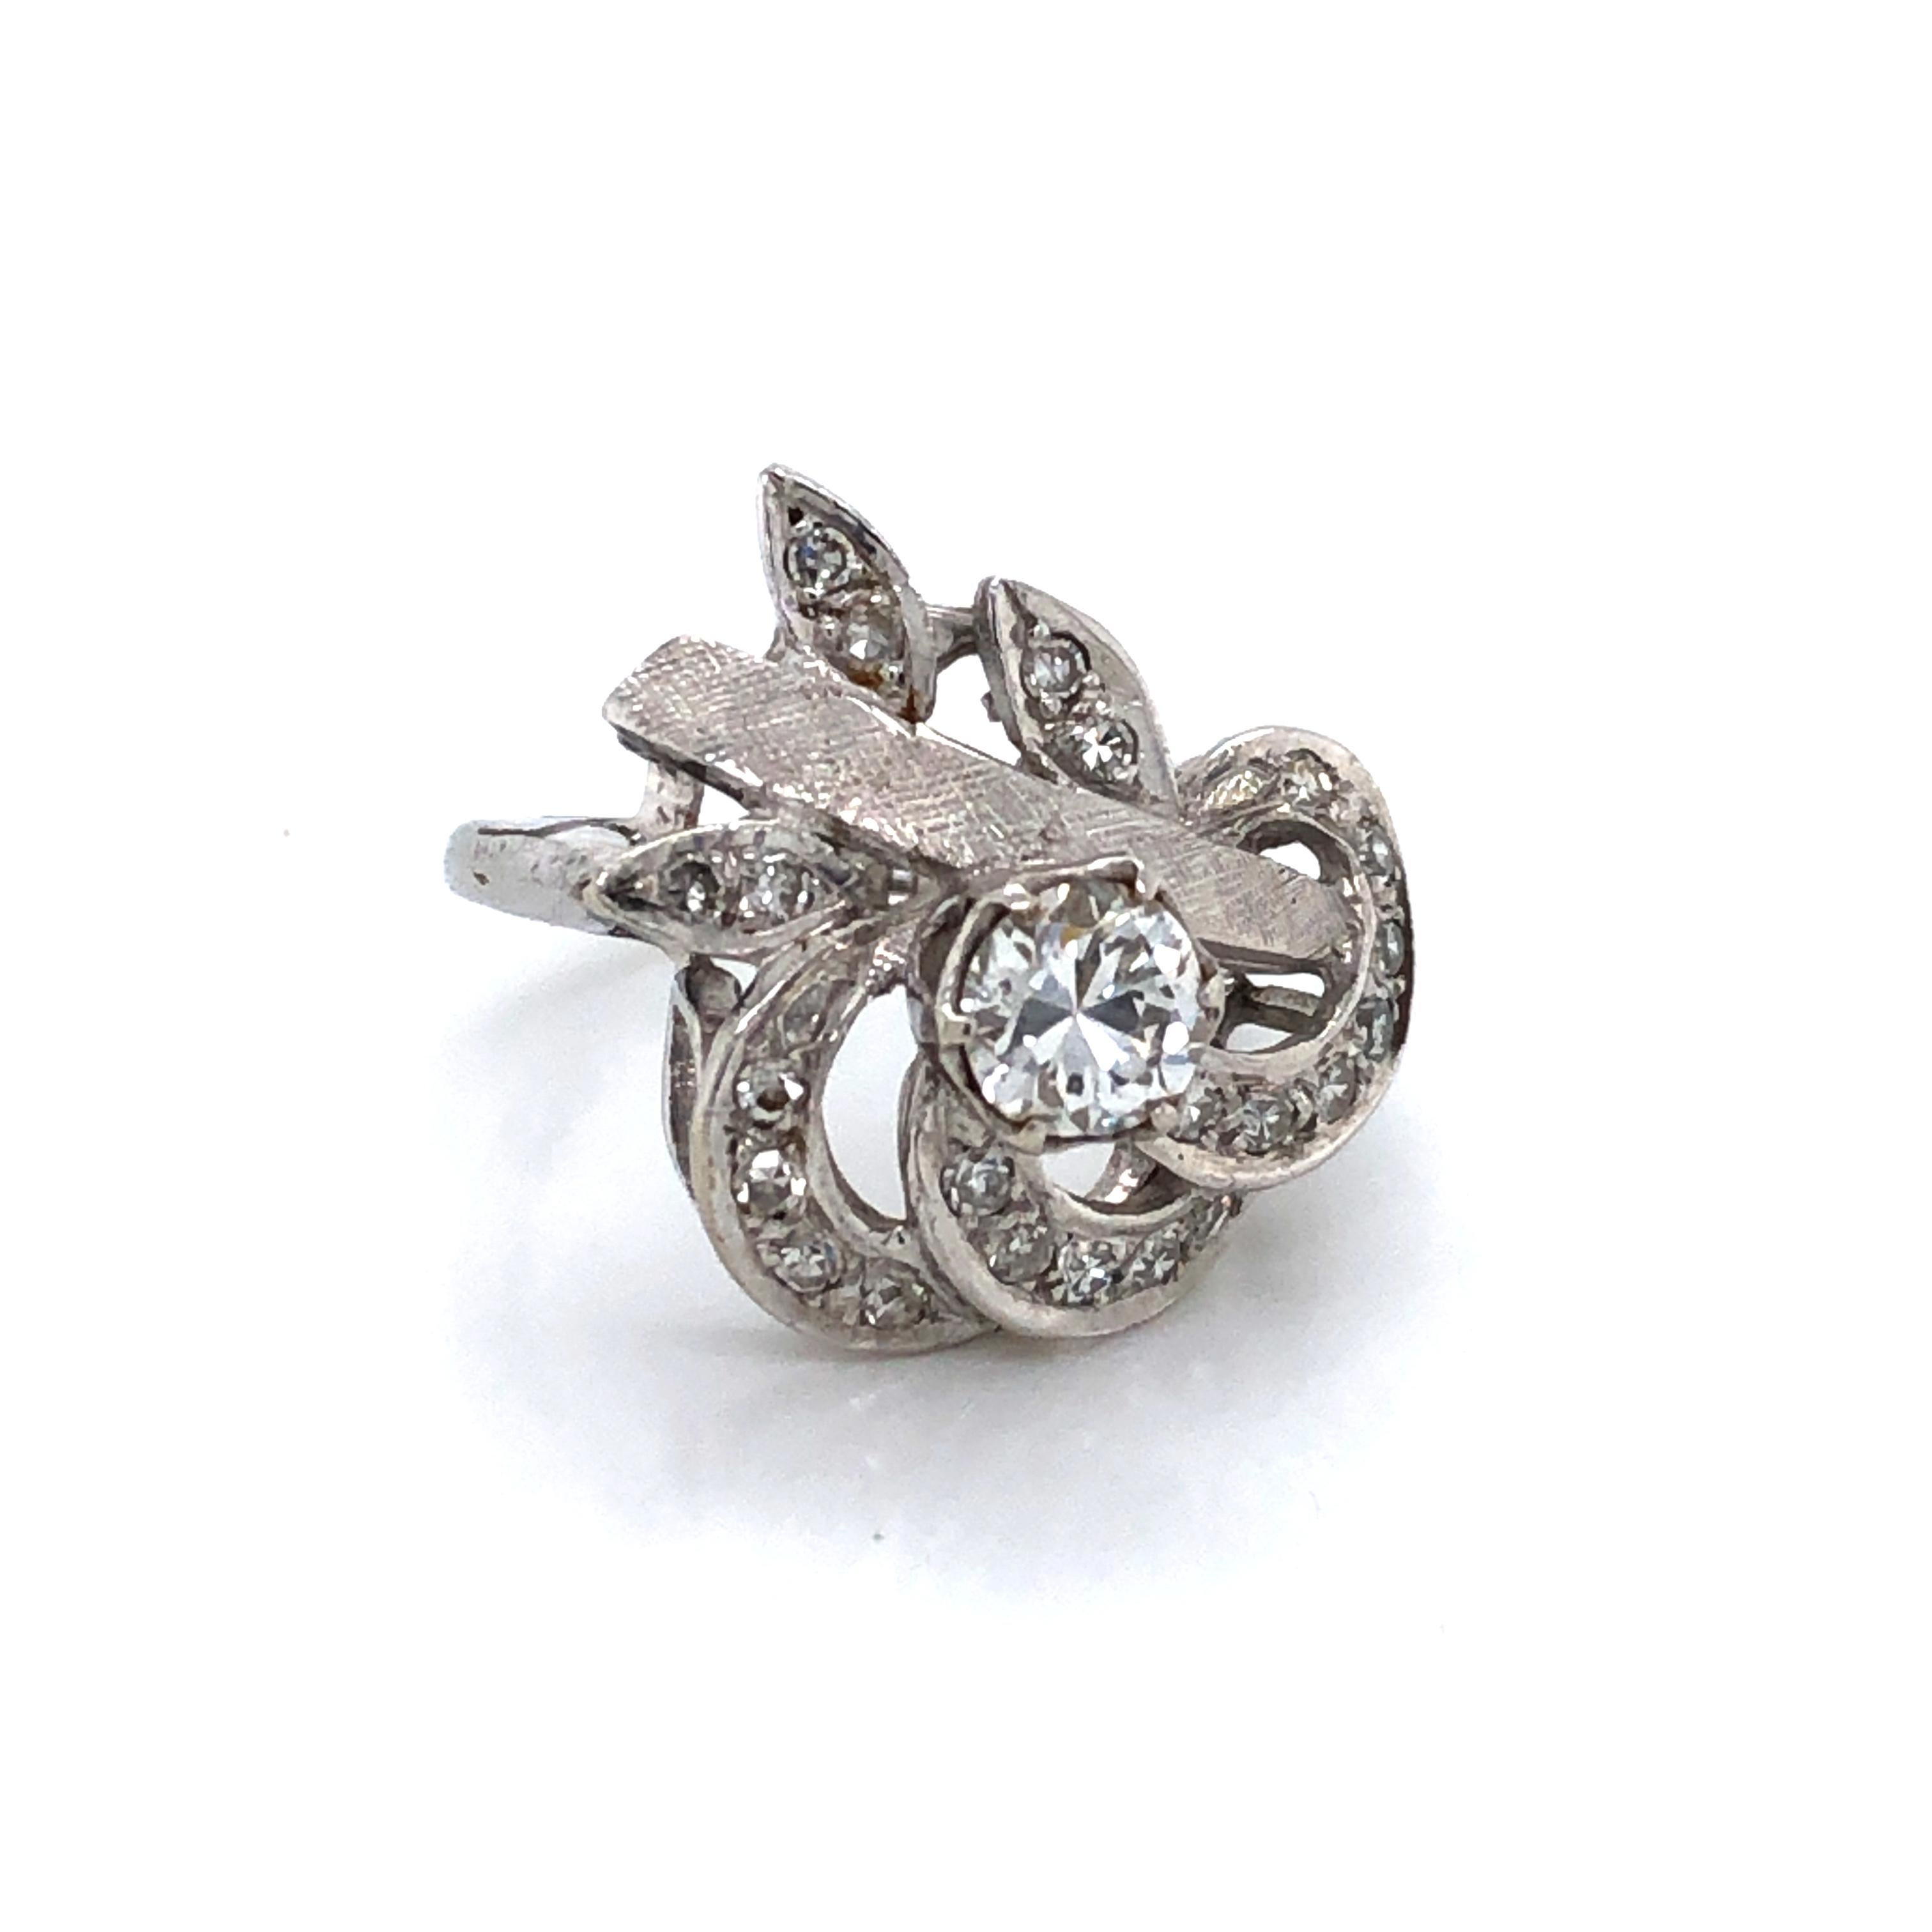 Love the soft curves of this handmade art nouveau floral inspired ring. Crafted with plenty of flair in twelve karat 12k white gold, this ring features one center stone .30 carat H/I3 center miner's cut diamond surrounded by swirling white gold